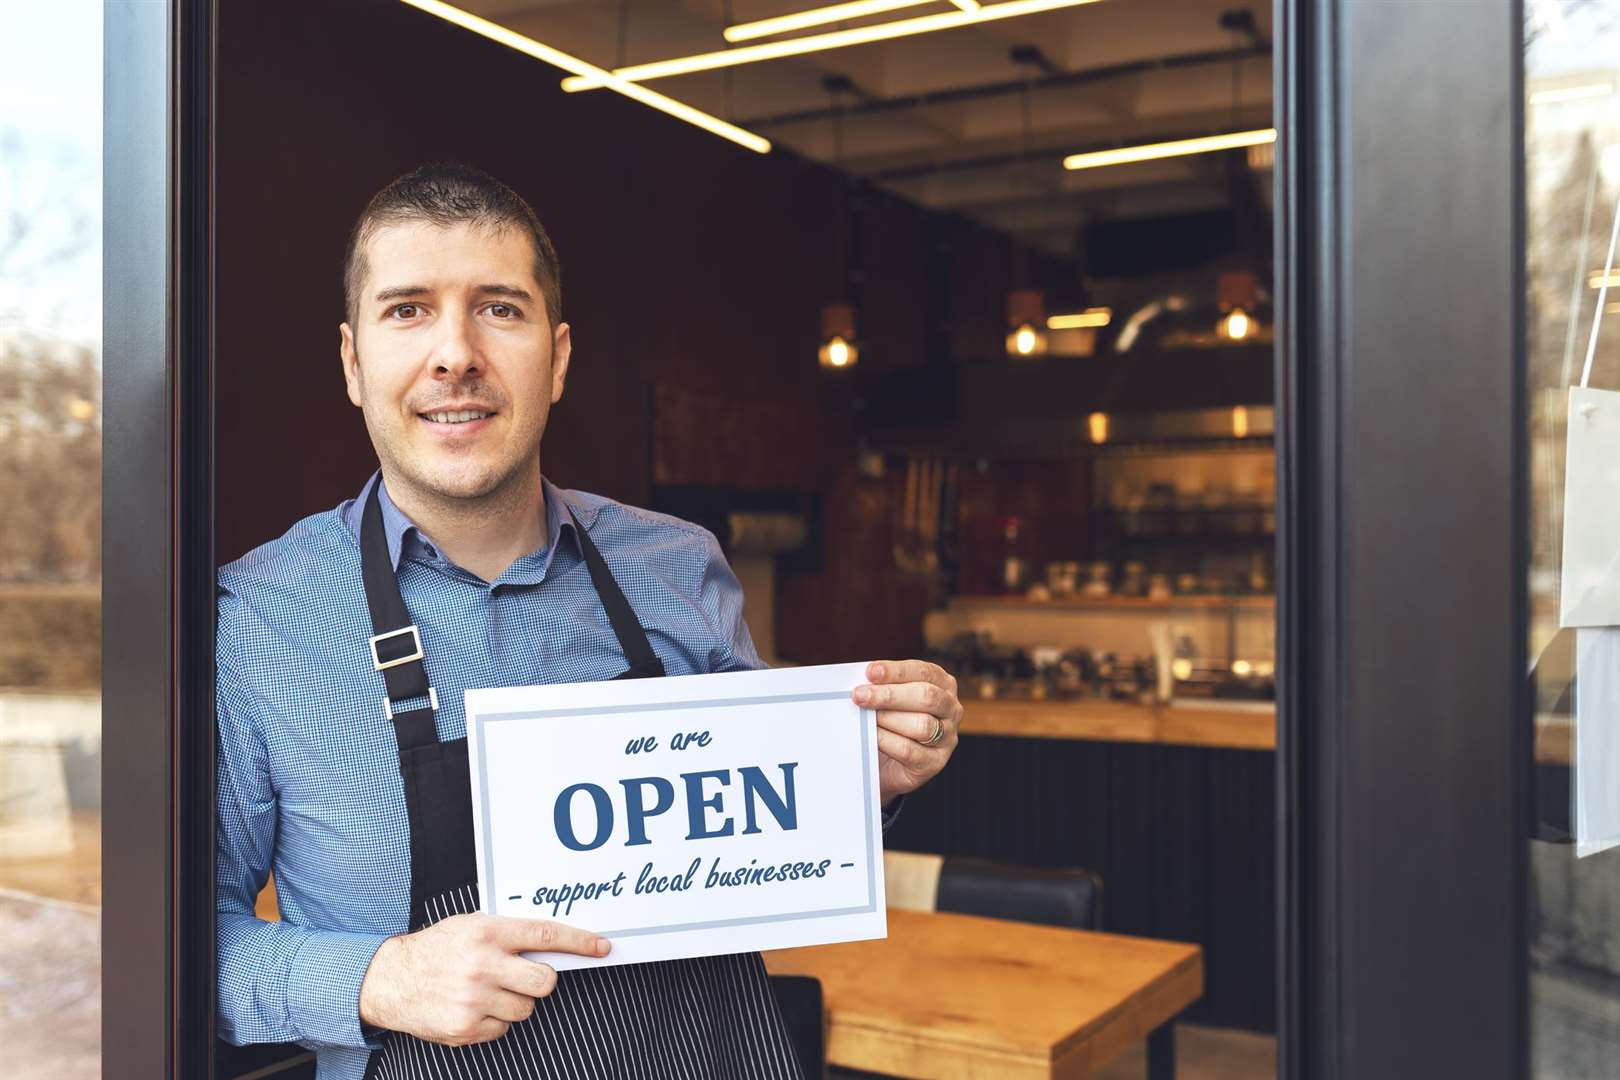 OPEN FOR BUSINESS: Thousands of firms across the UK are reopening in June